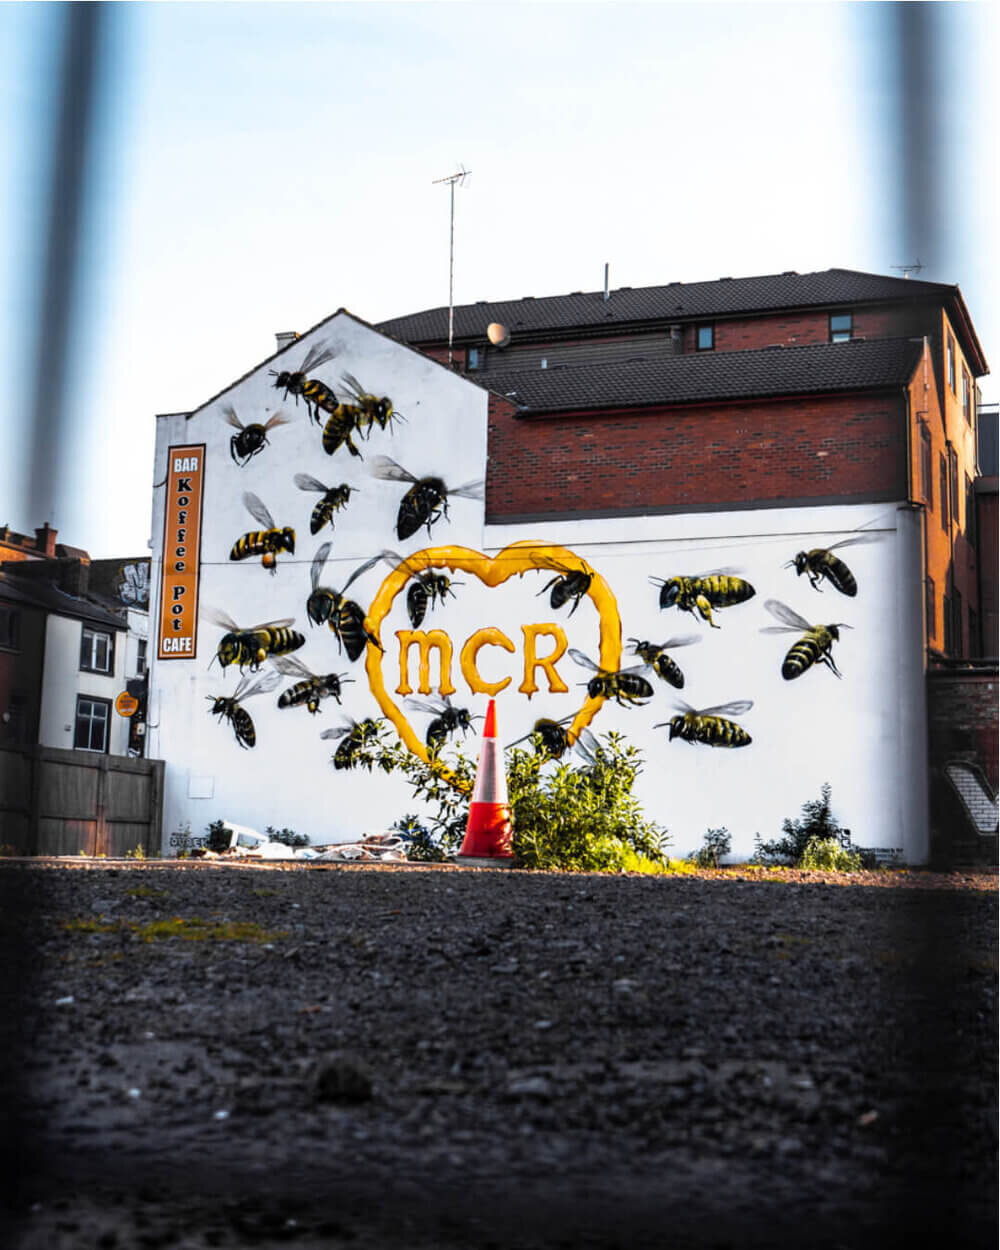 MCR graffiti showing 23 bees on the side of a building in Northern Quarter, Manchester